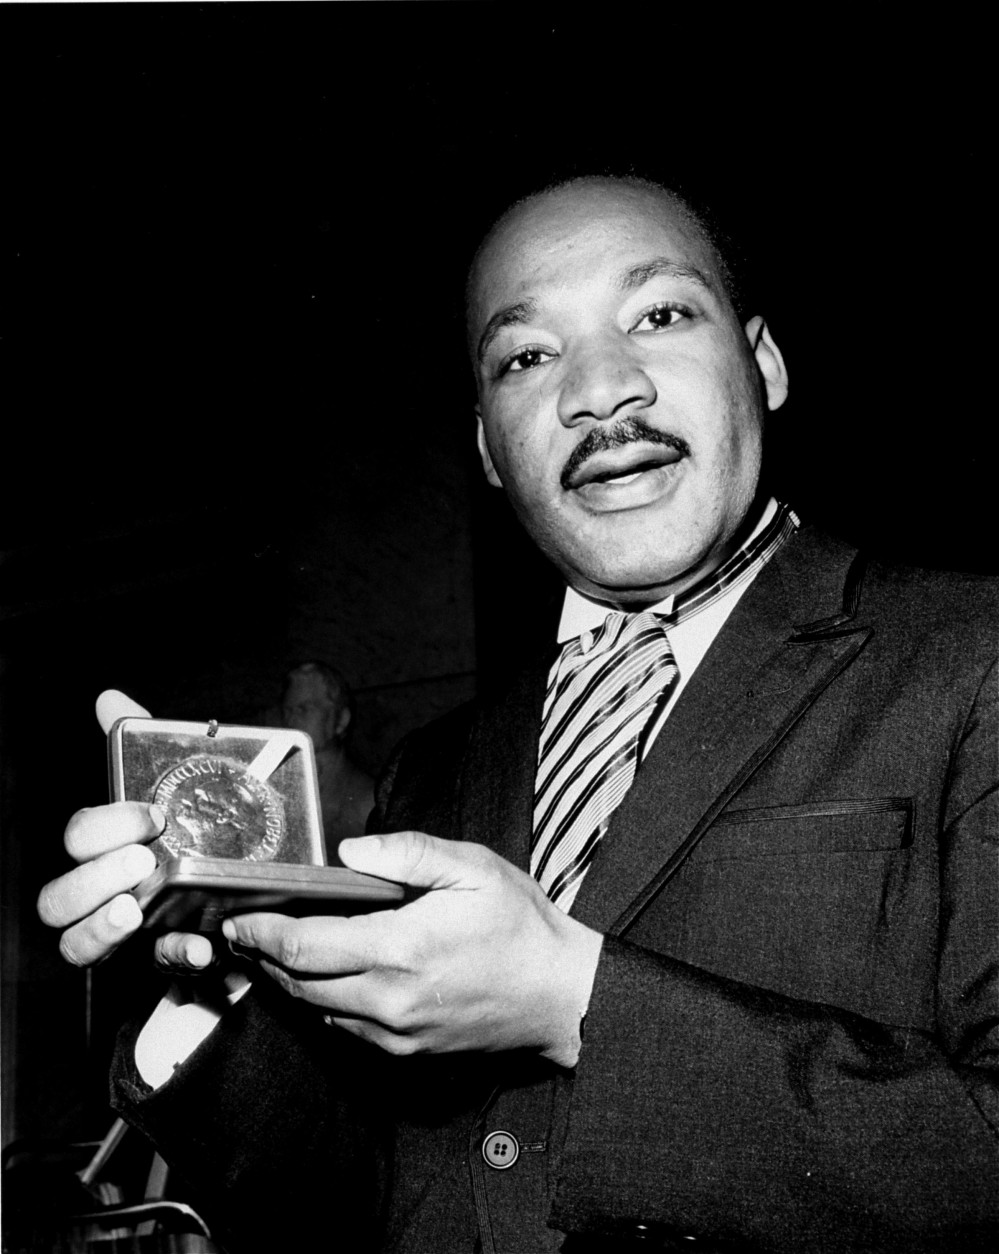 Dr. Martin Luther King, Jr. displays his 1964 Nobel Peace Prize medal in Oslo, Norway, December 10, 1964.  The 35-year-old Dr. King was honored for promoting the principle of non-violence in the civil rights movement.  (AP Photo)